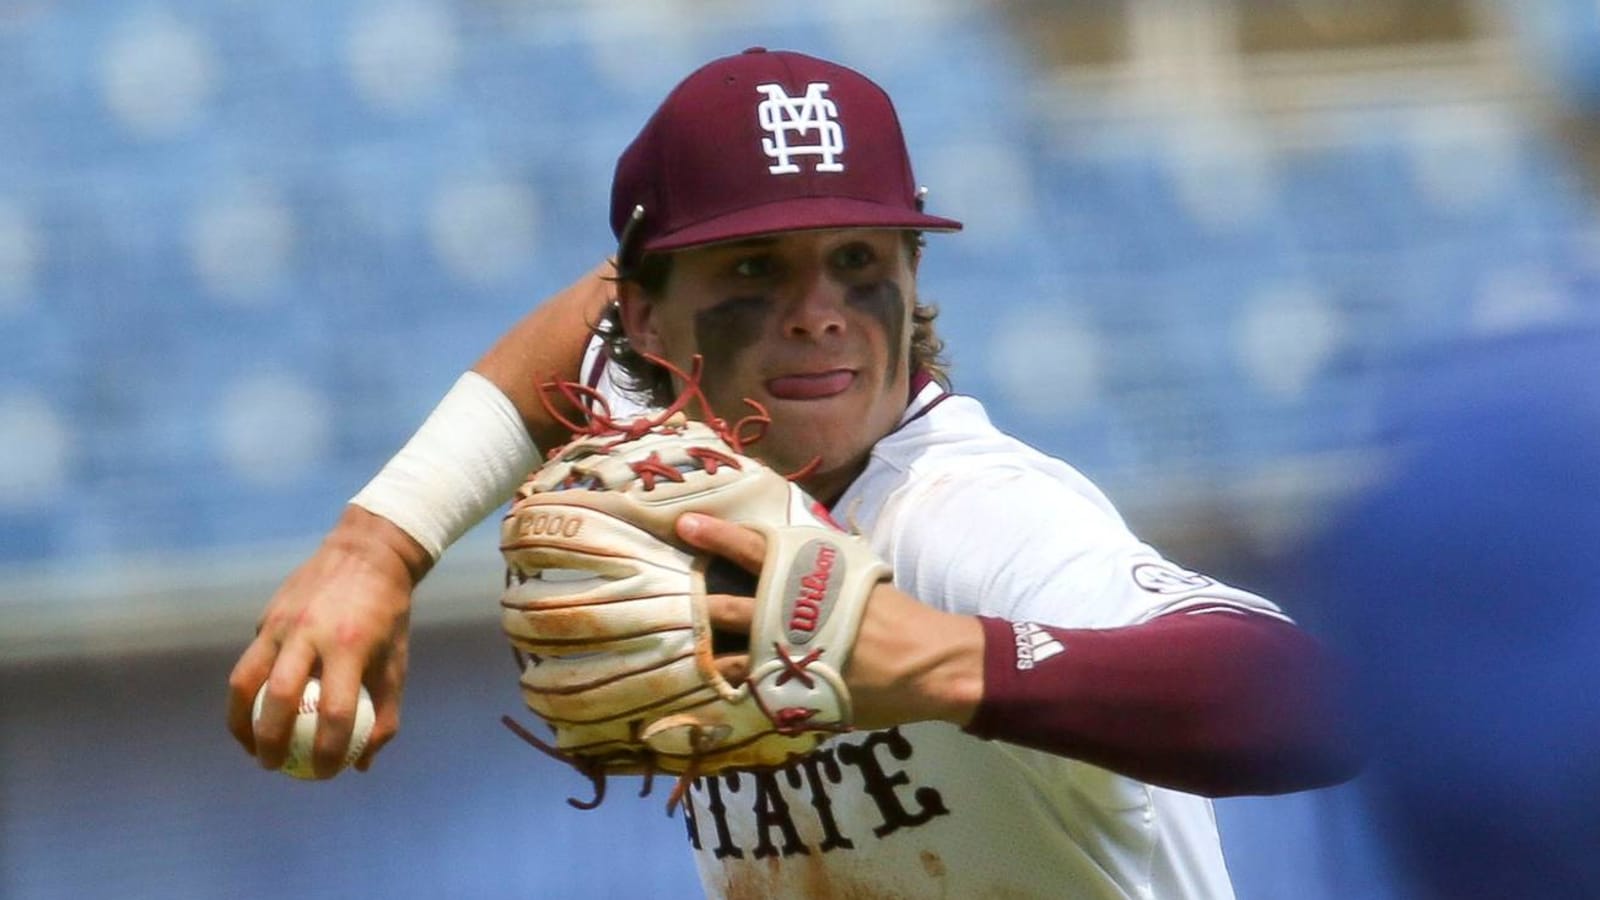 Watch: Mississippi State beats Texas on walk-off hit at CWS